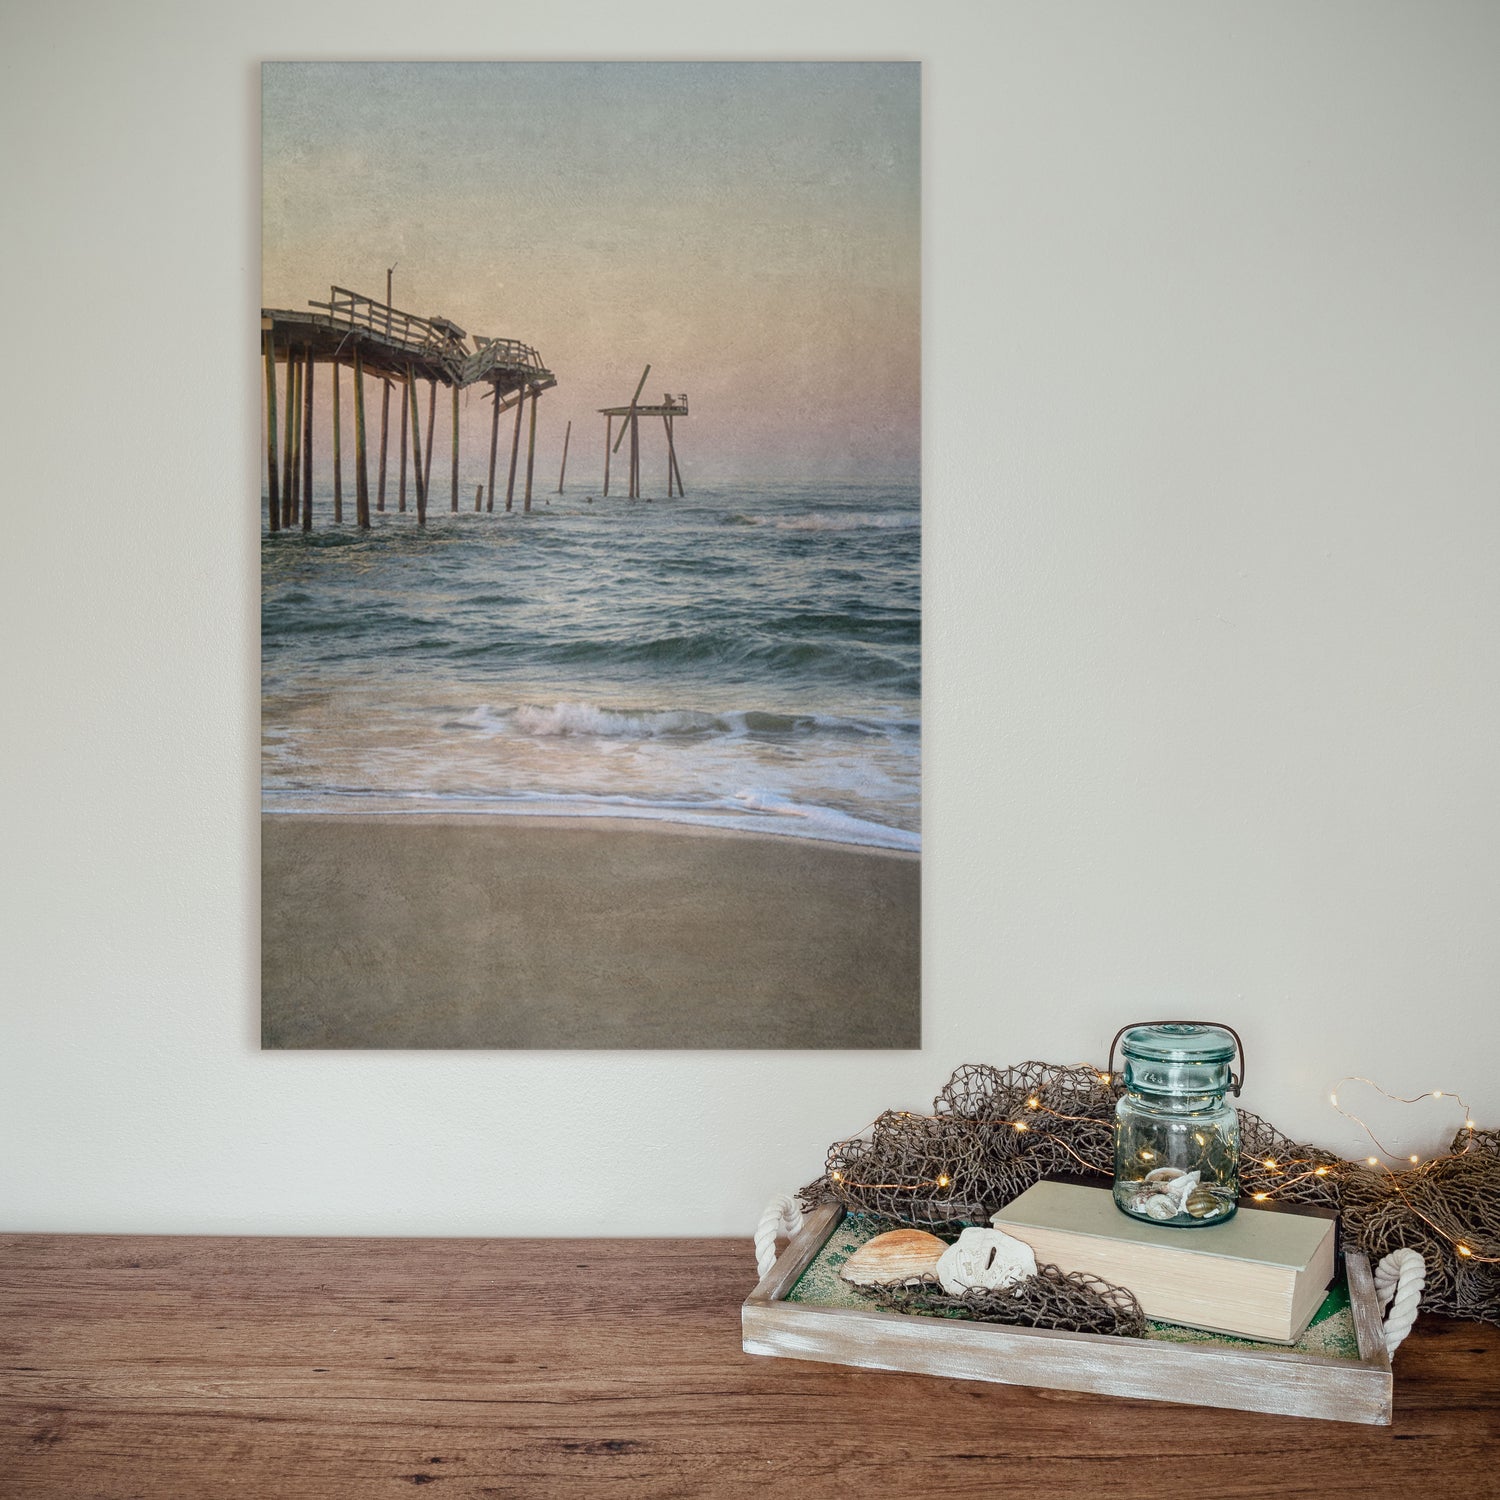 A vintage-inspired Frisco Pier Vintage canvas wall art print showcasing the iconic landmark in the Outer Banks of North Carolina. The canvas features a textured, weathered aesthetic, adding a touch of nostalgia and charm to any space. Soft pastel colors depict a serene sunset, creating a tranquil ambiance.